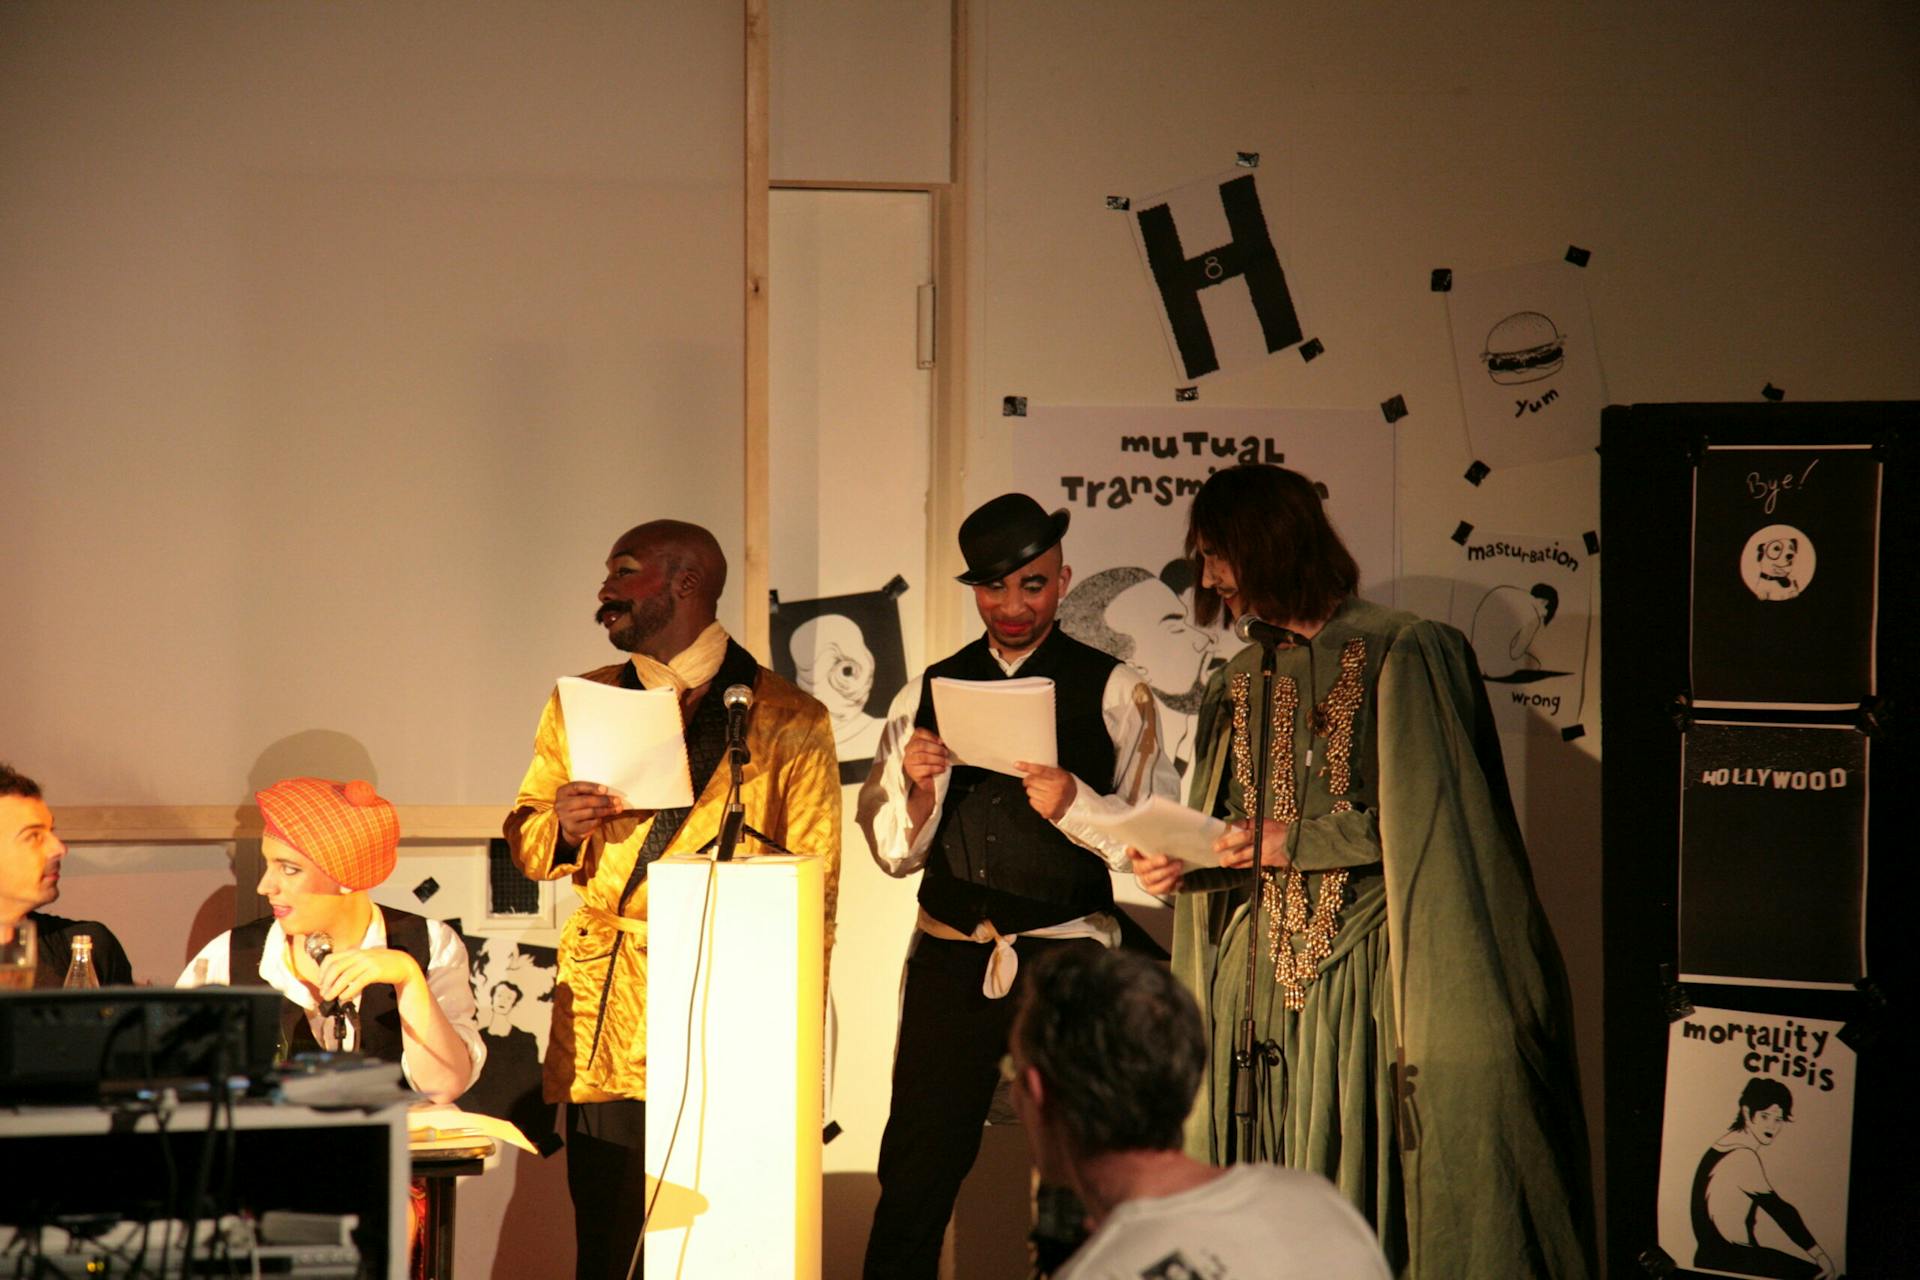 Three costumed performers stand in front of an audience. the performers are holding scripts.